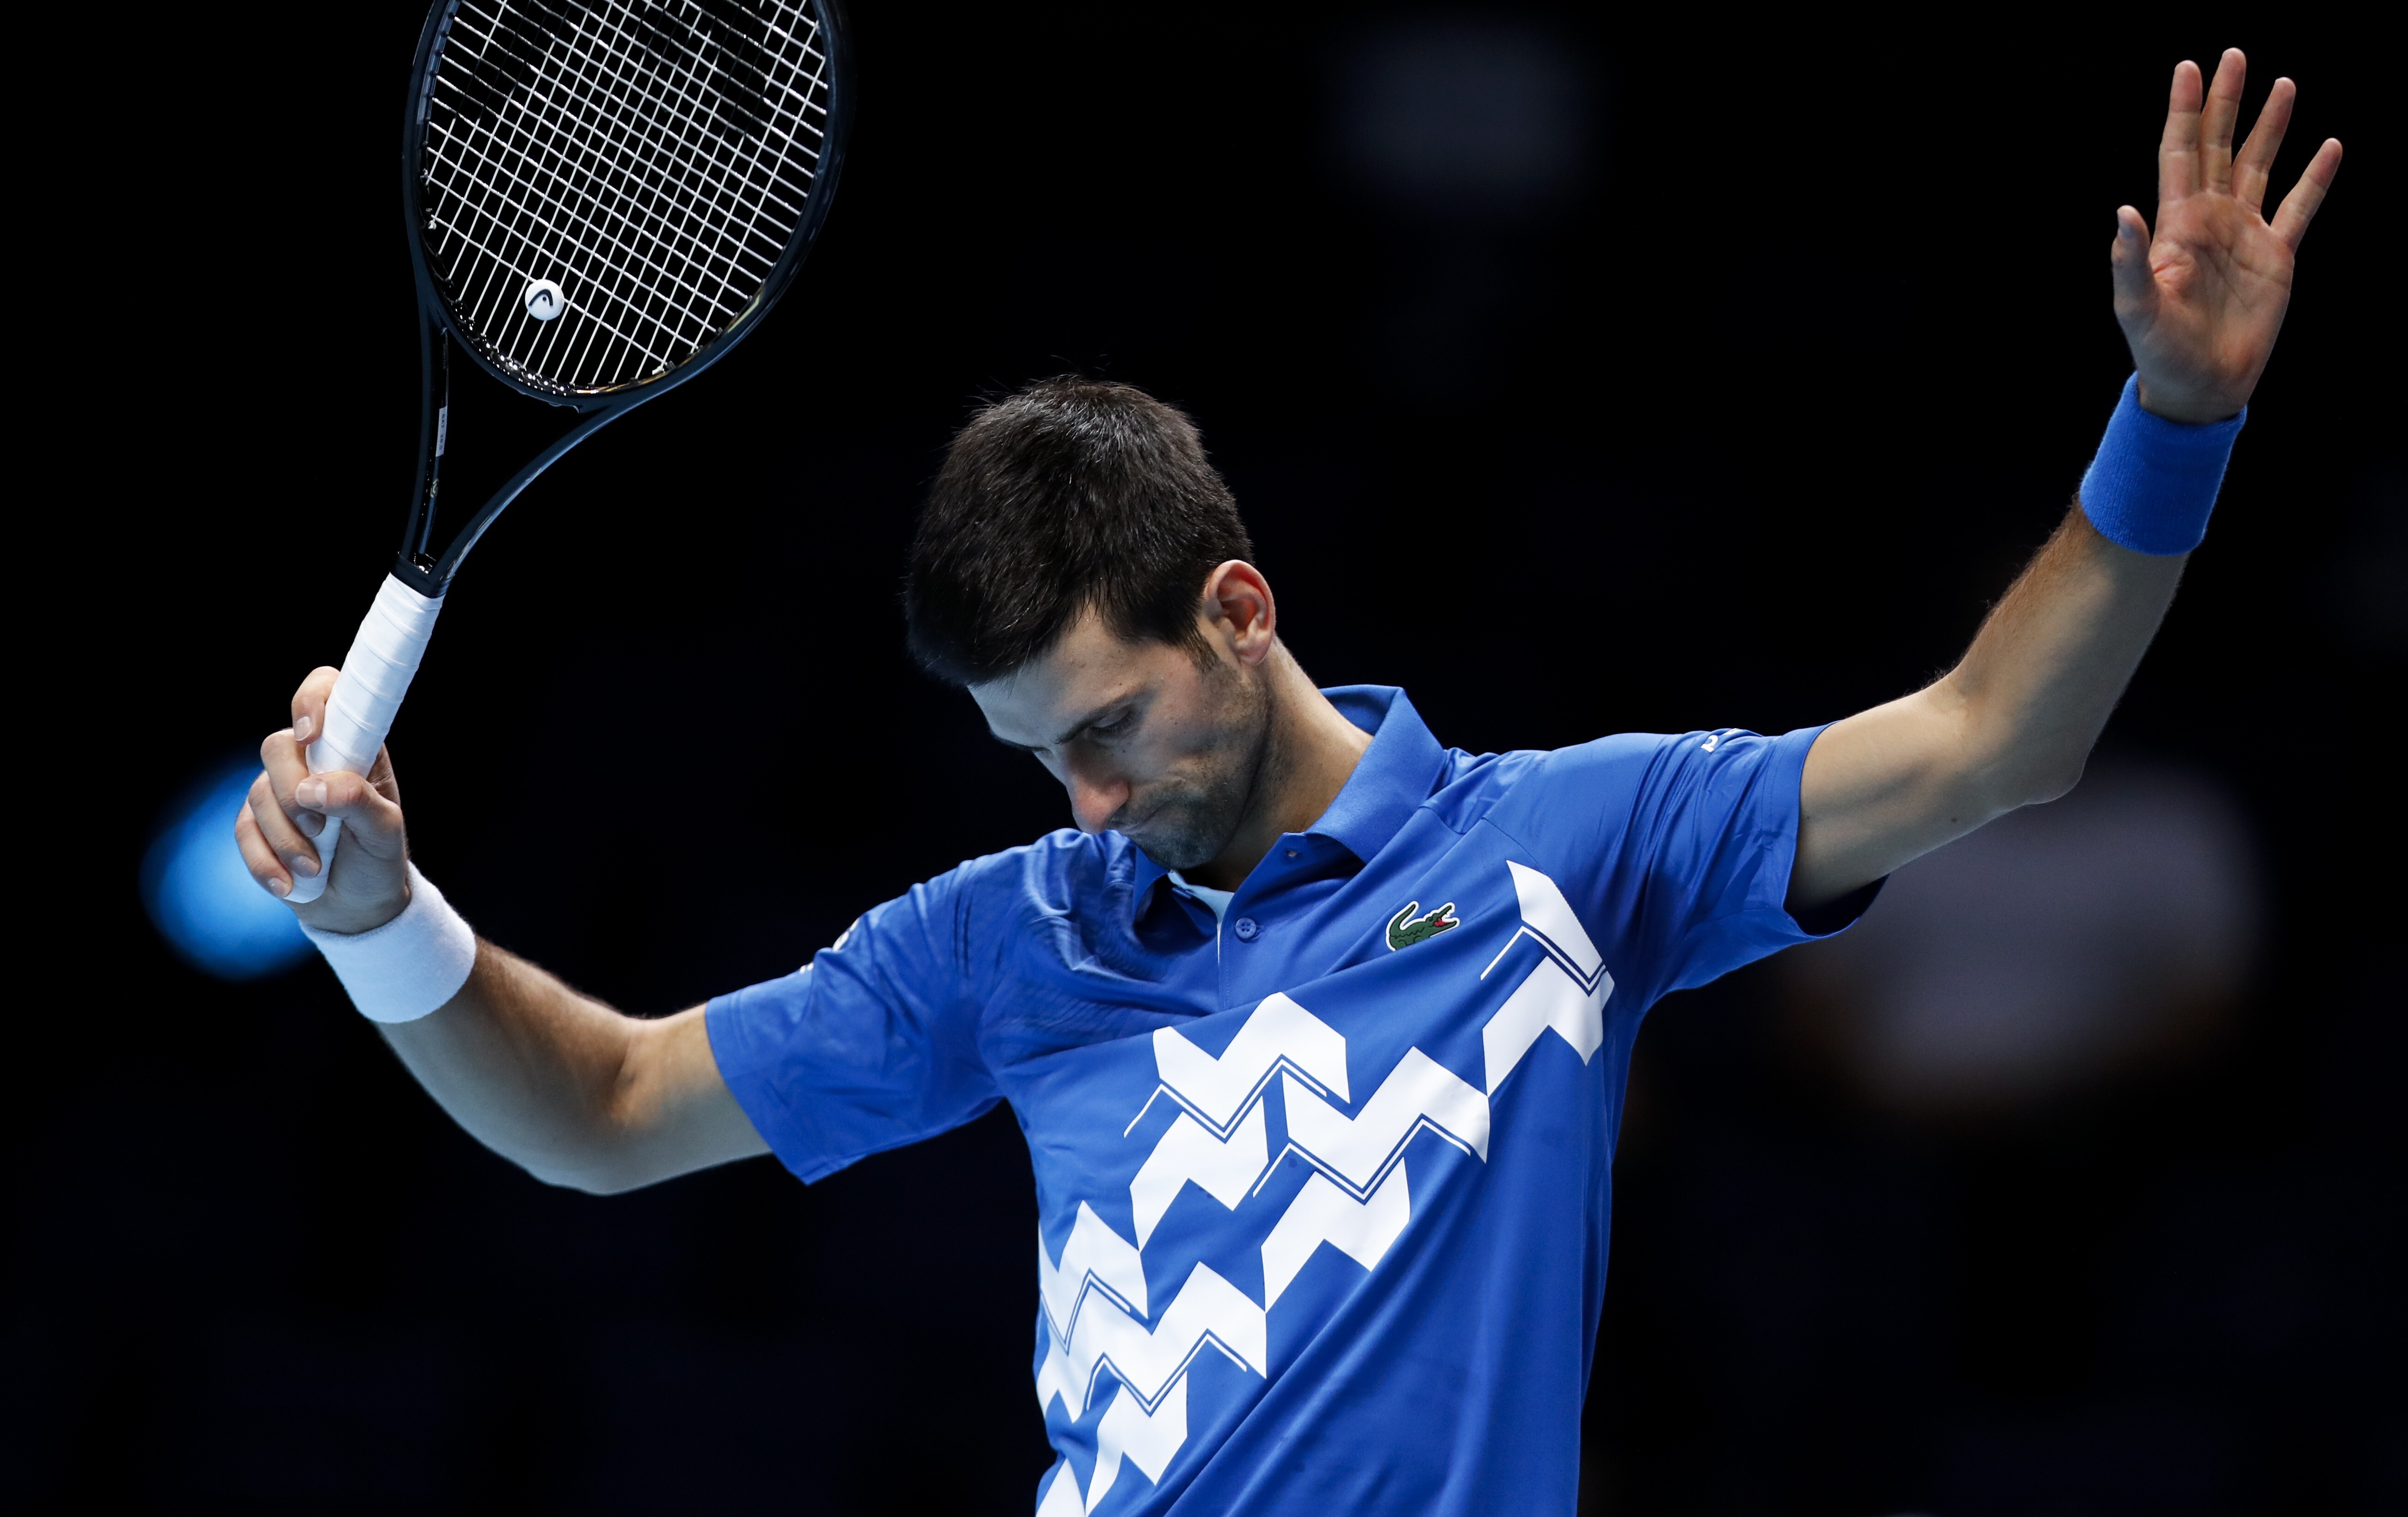 Novak Djokovic was eliminated at the semi-final stage of the ATP Finals by Dominic Thiem. Photo: Xinhua